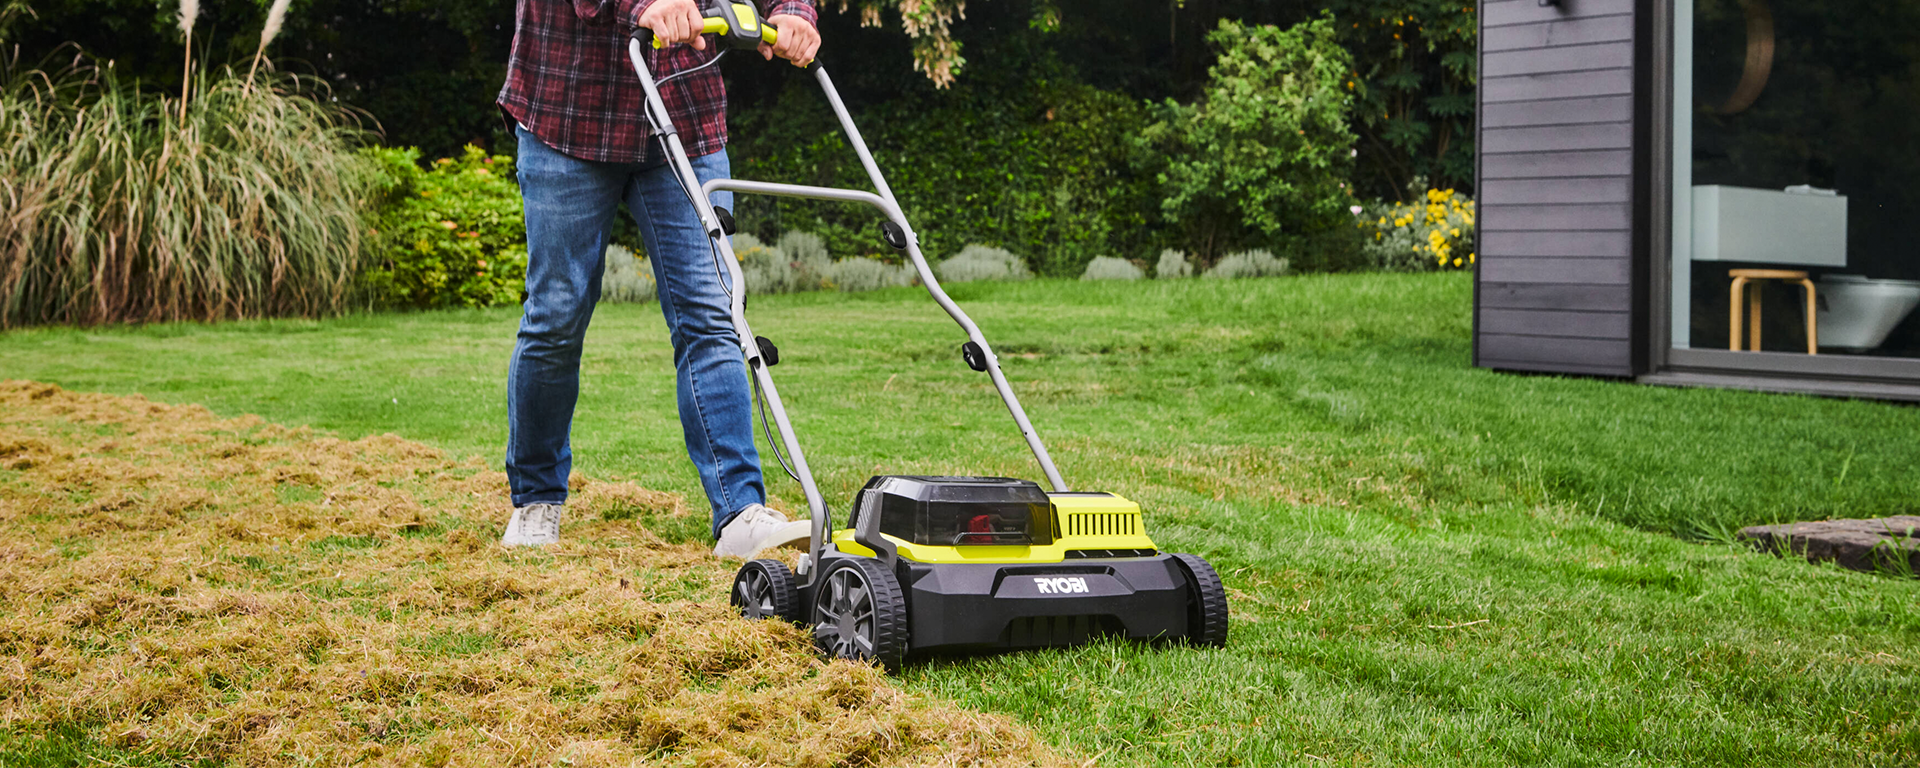 What is the best way to scarify my lawn?